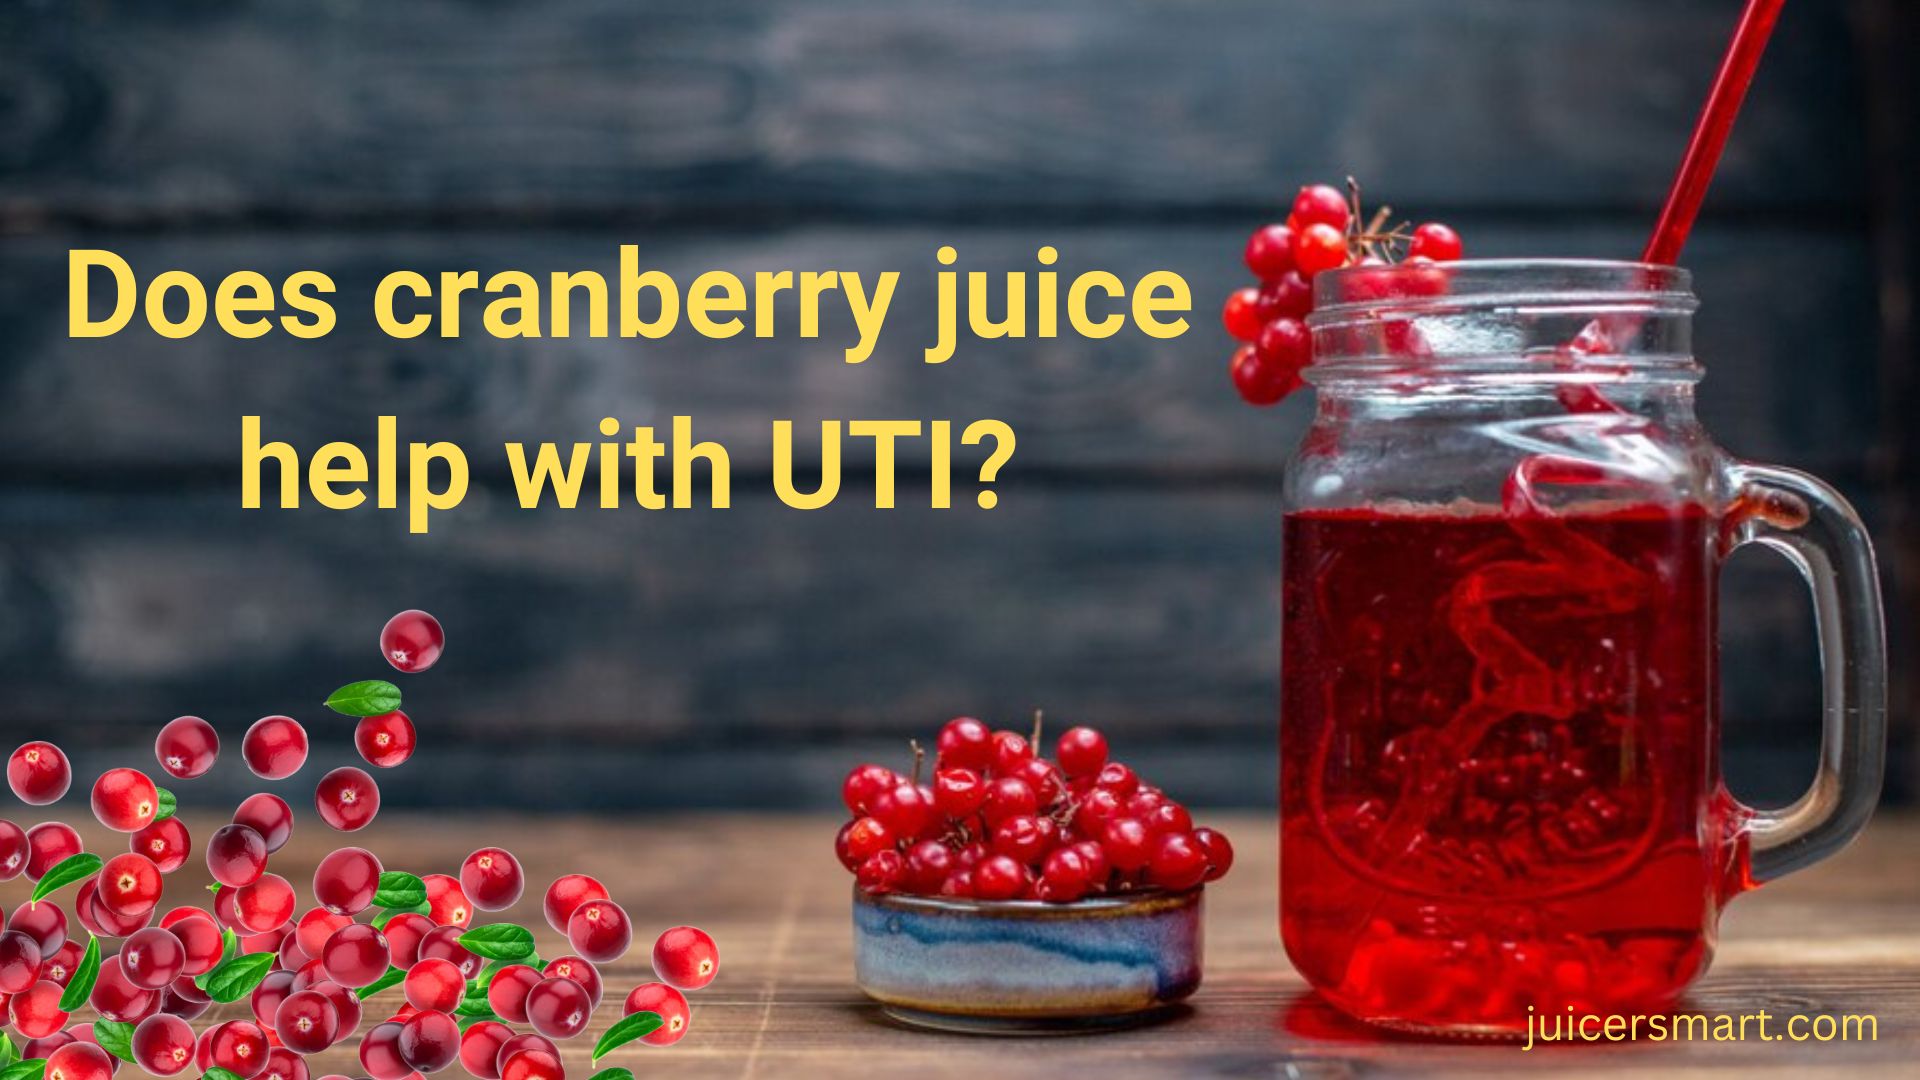 Does cranberry juice help with UTI?